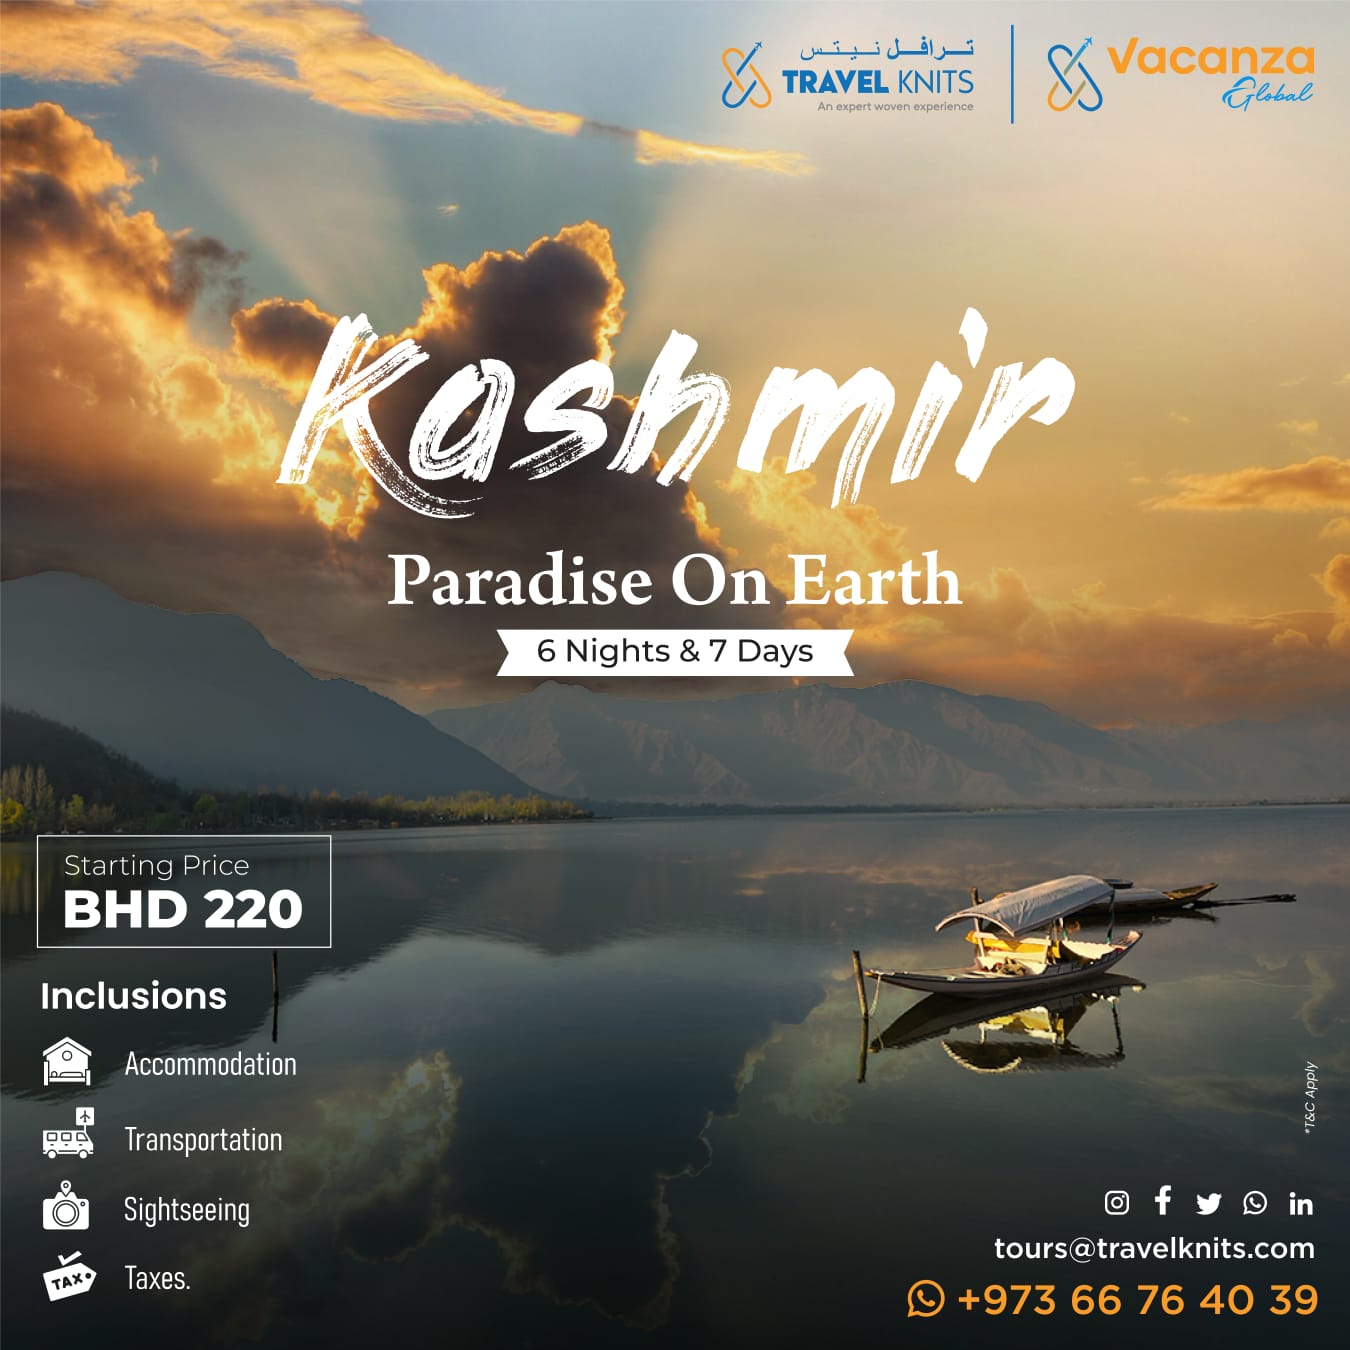 KASHMIR  PARADISE ON EARTH  |IndiaTour Packages - Book honeymoon ,family,adventure tour packages to India|Travel Knits												